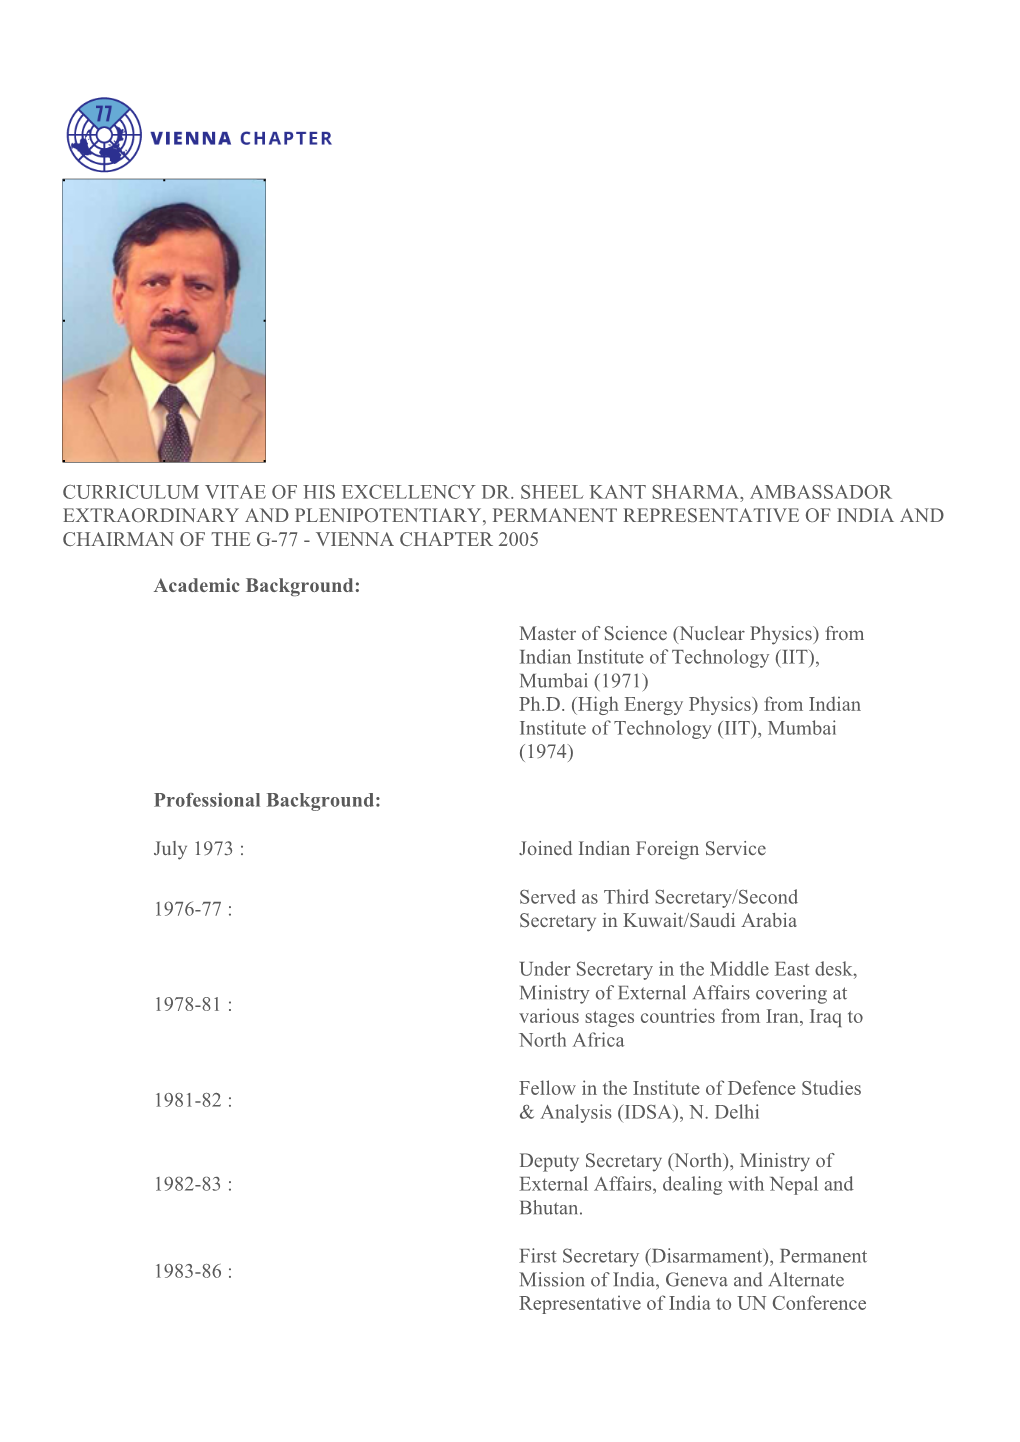 Curriculum Vitae of His Excellency Dr. Sheel Kant